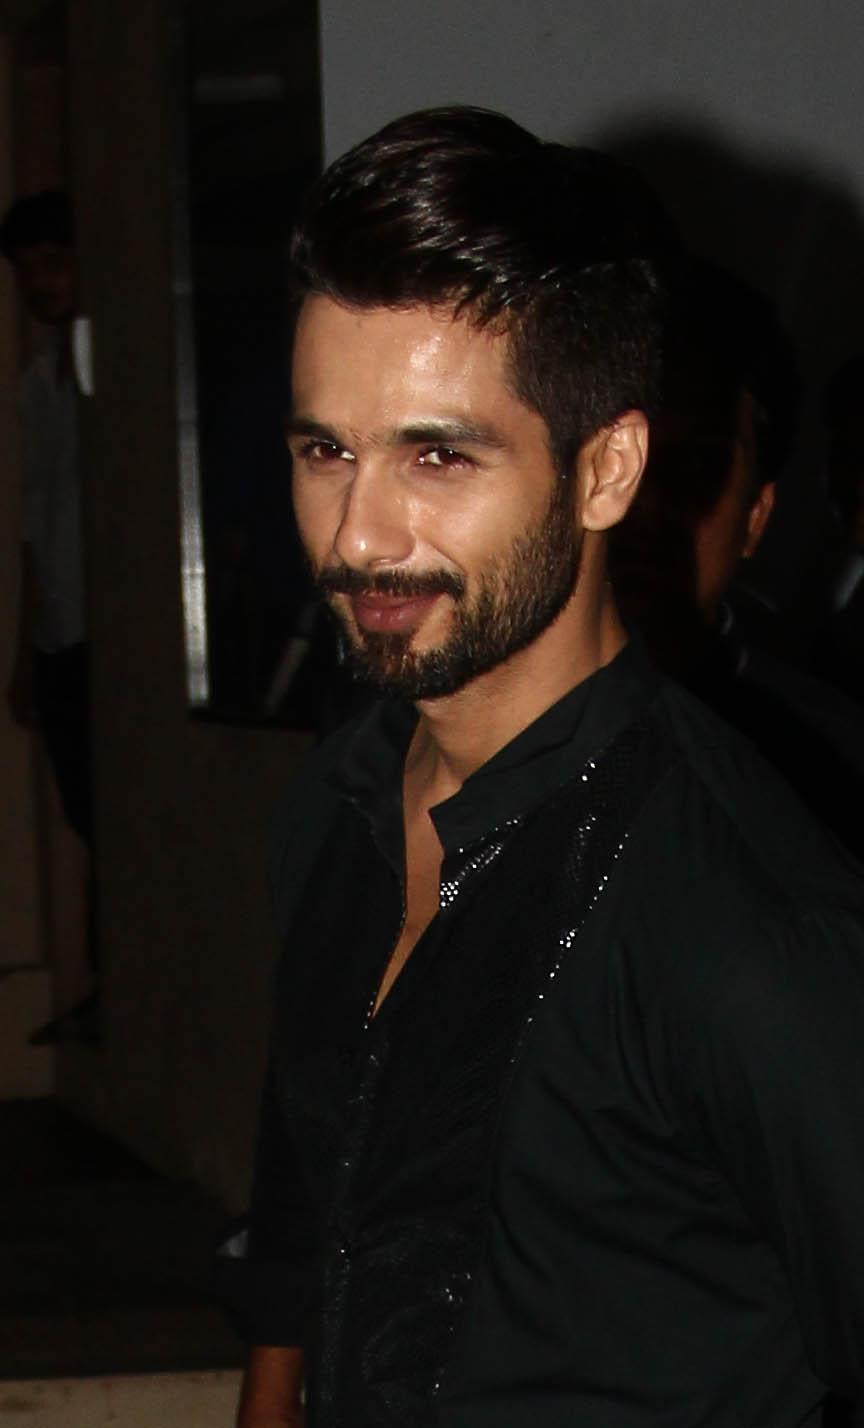 Padmavati row: 'I went through a similar process with Udta Punjab and  eventually saw the film release' says Shahid Kapoor - Bollywood News &  Gossip, Movie Reviews, Trailers & Videos at Bollywoodlife.com